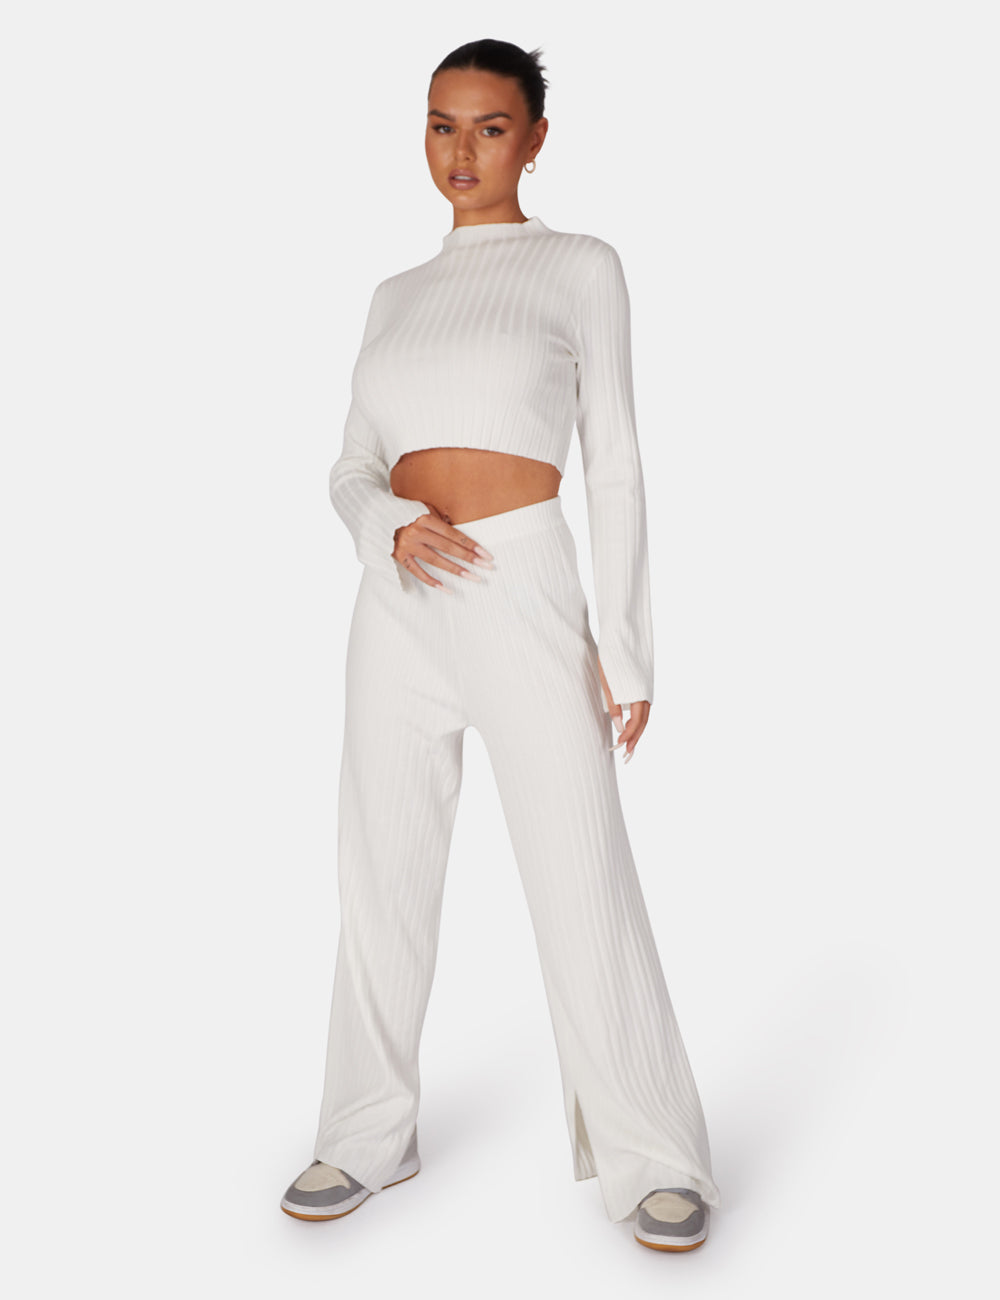 Missguided, Underbust Detail Rib Knit Crop Top, White